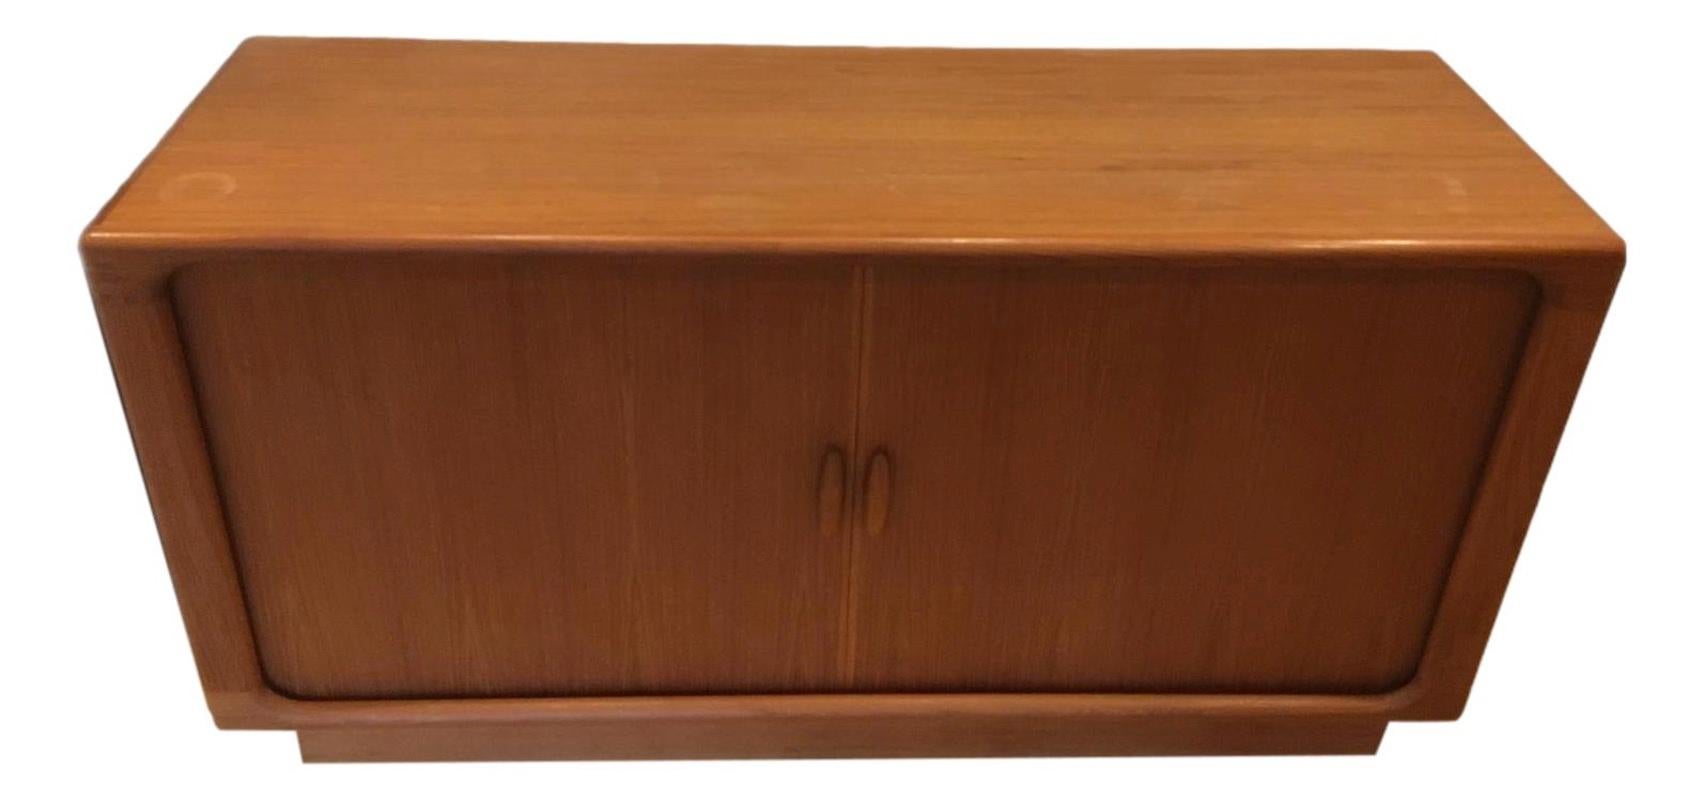 German Danish Credenza with Tambour Doors by Dyrlund Denmark, 1960s For Sale